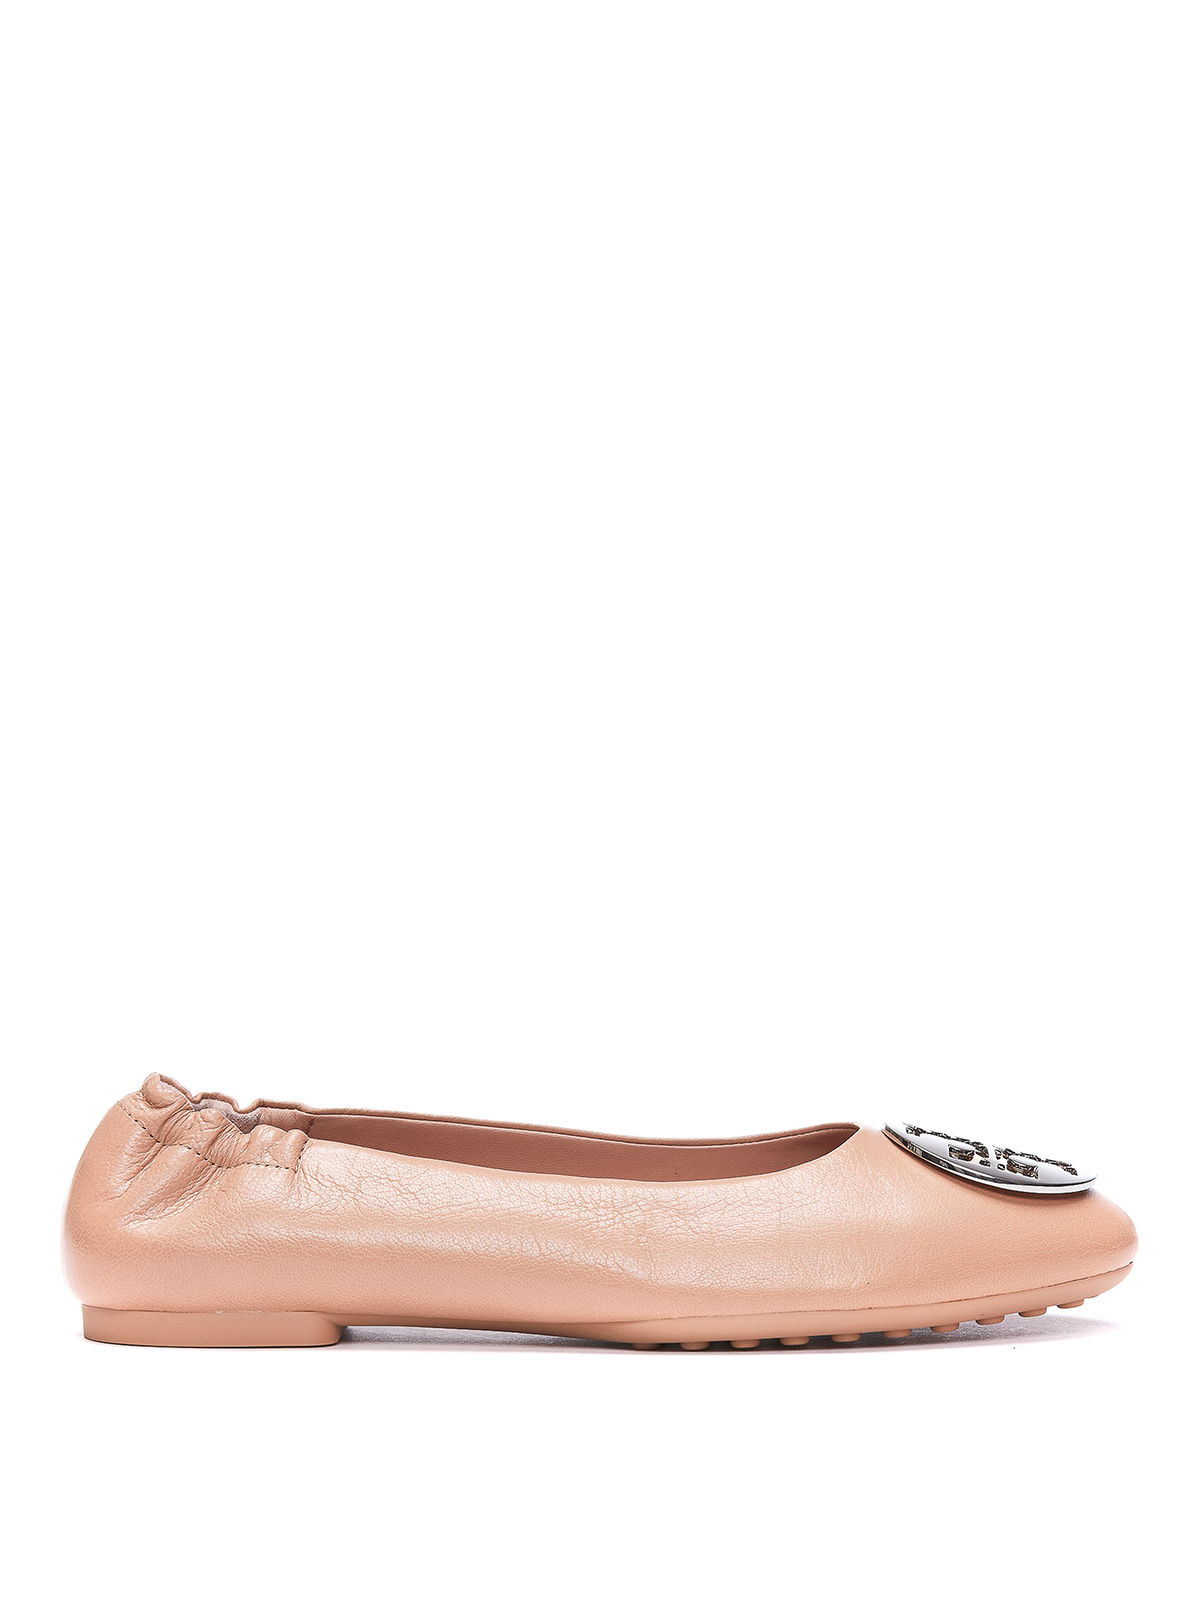 Flat shoes Tory Burch - Leather Claire flats with logo plaque - 147379236